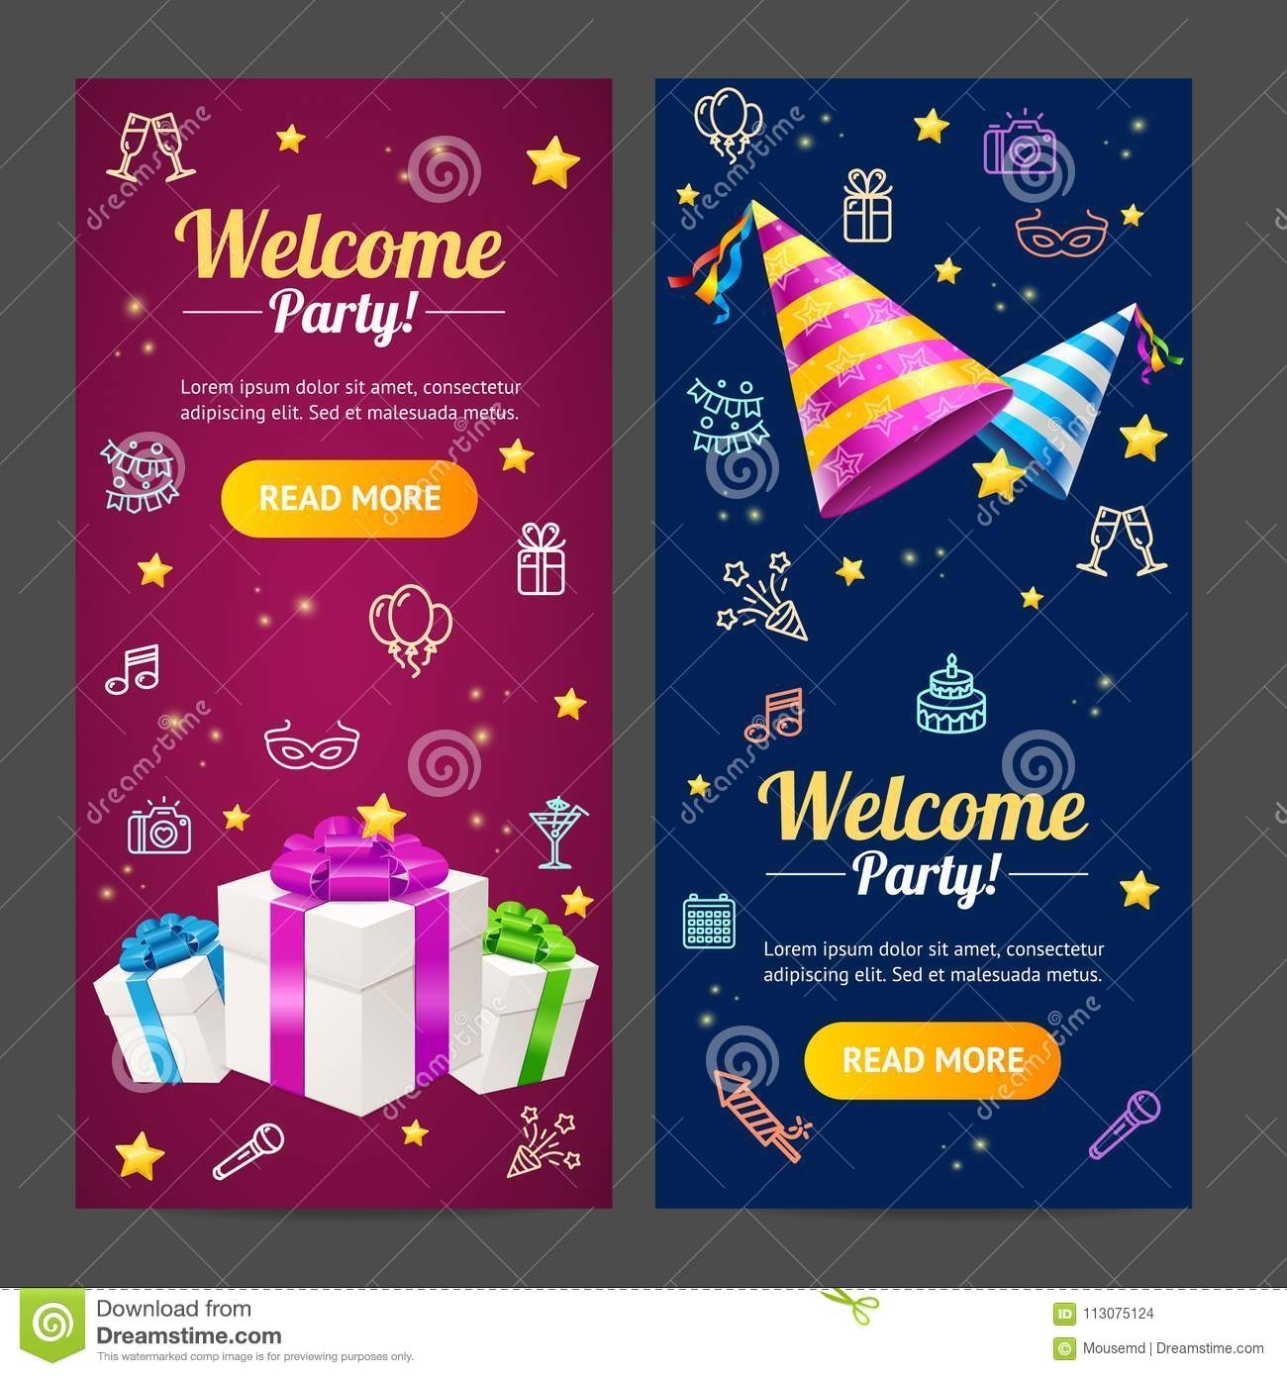 Welcome Party Template Card Vecrtical Set. Vector Stock Vector – Illustration Of Concept With Celebrate It Templates Place Cards